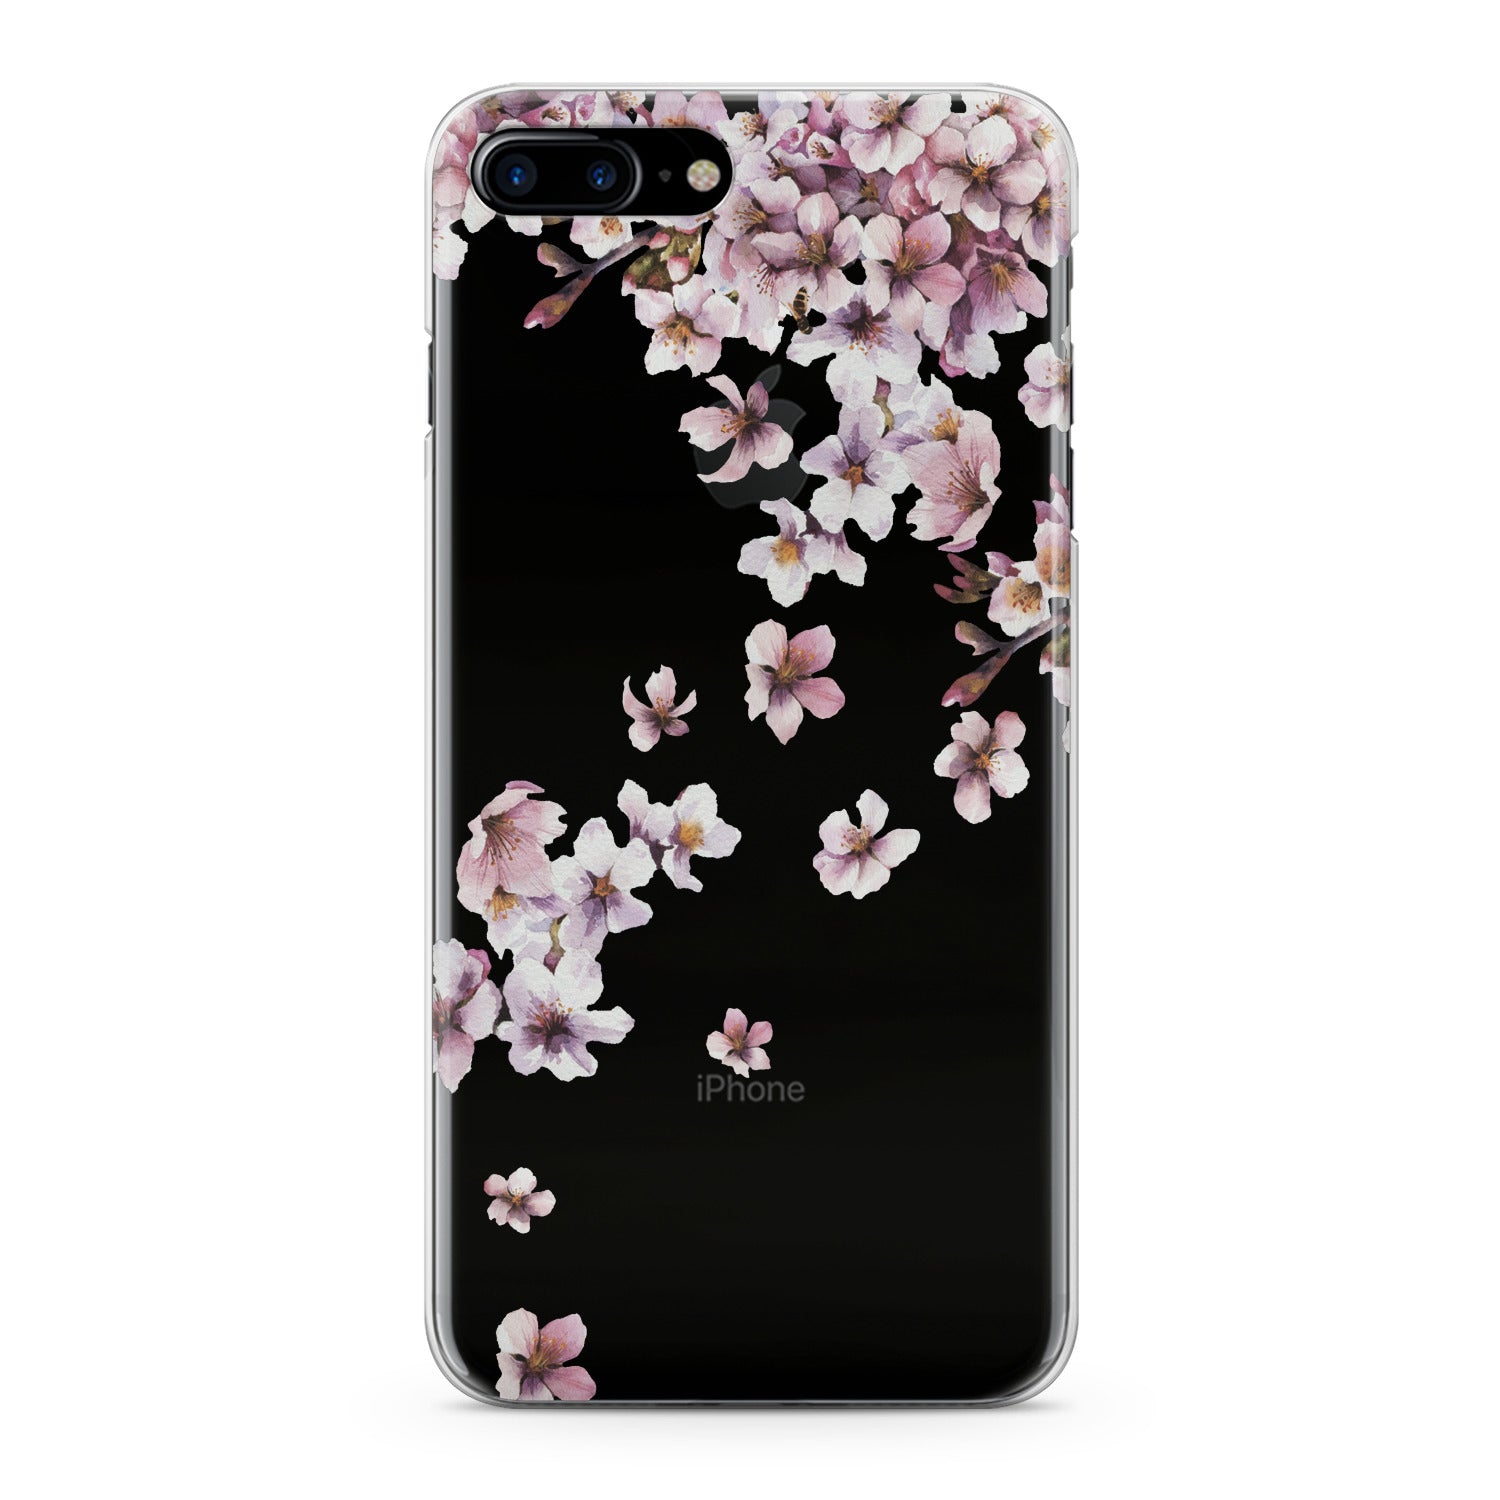 Lex Altern White Blossom Phone Case for your iPhone & Android phone.